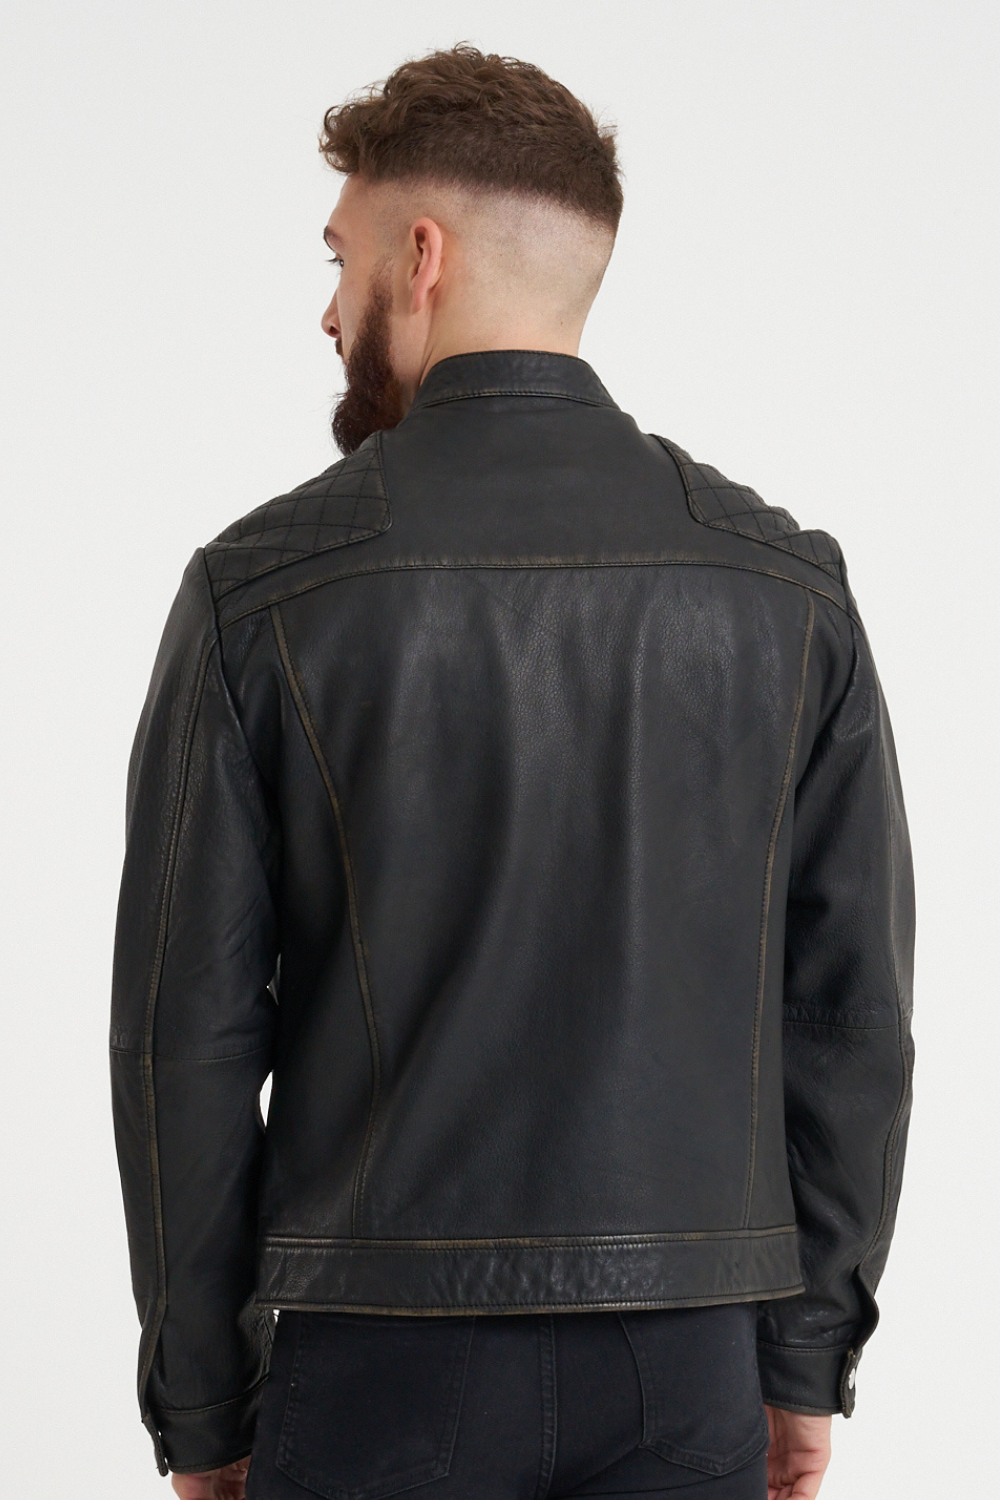 Washed leather, tab neck collar and subtle shoulder quilted stitch - what more could you want from a classic leather jacket? The iconic BARNEYS ORIGINALS James jacket is made from super soft sheep leather that boasts timeless style and prevailing durability. As seen on the likes of Jason Statham, this biker jacket is a must have for any occassion.